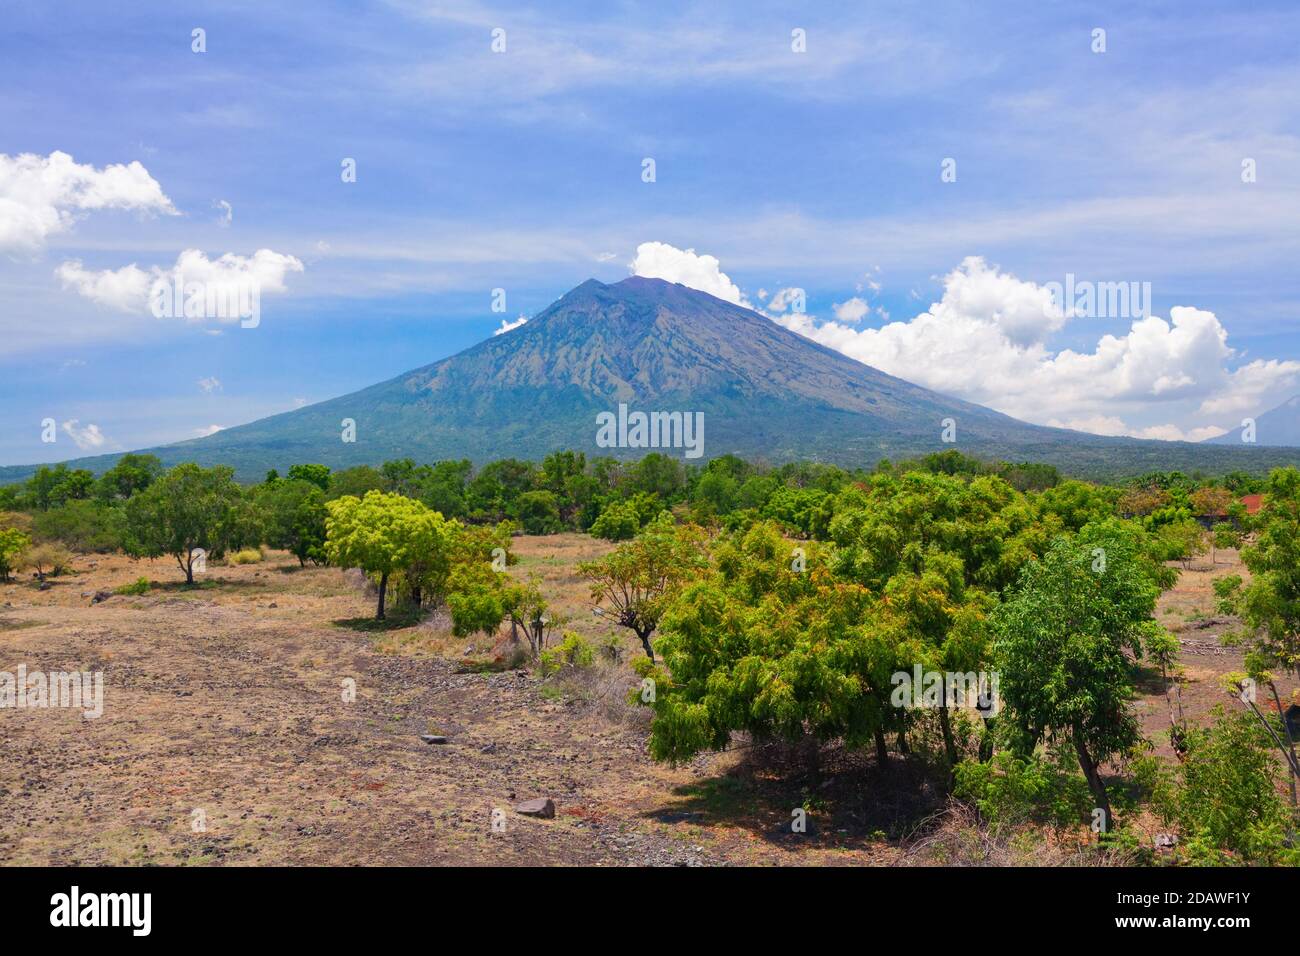 View from Tulamben village to Mount Agung. Mount Agung is popular tourist hiking route and highest active volcano on Bali island, Indonesia. Stock Photo